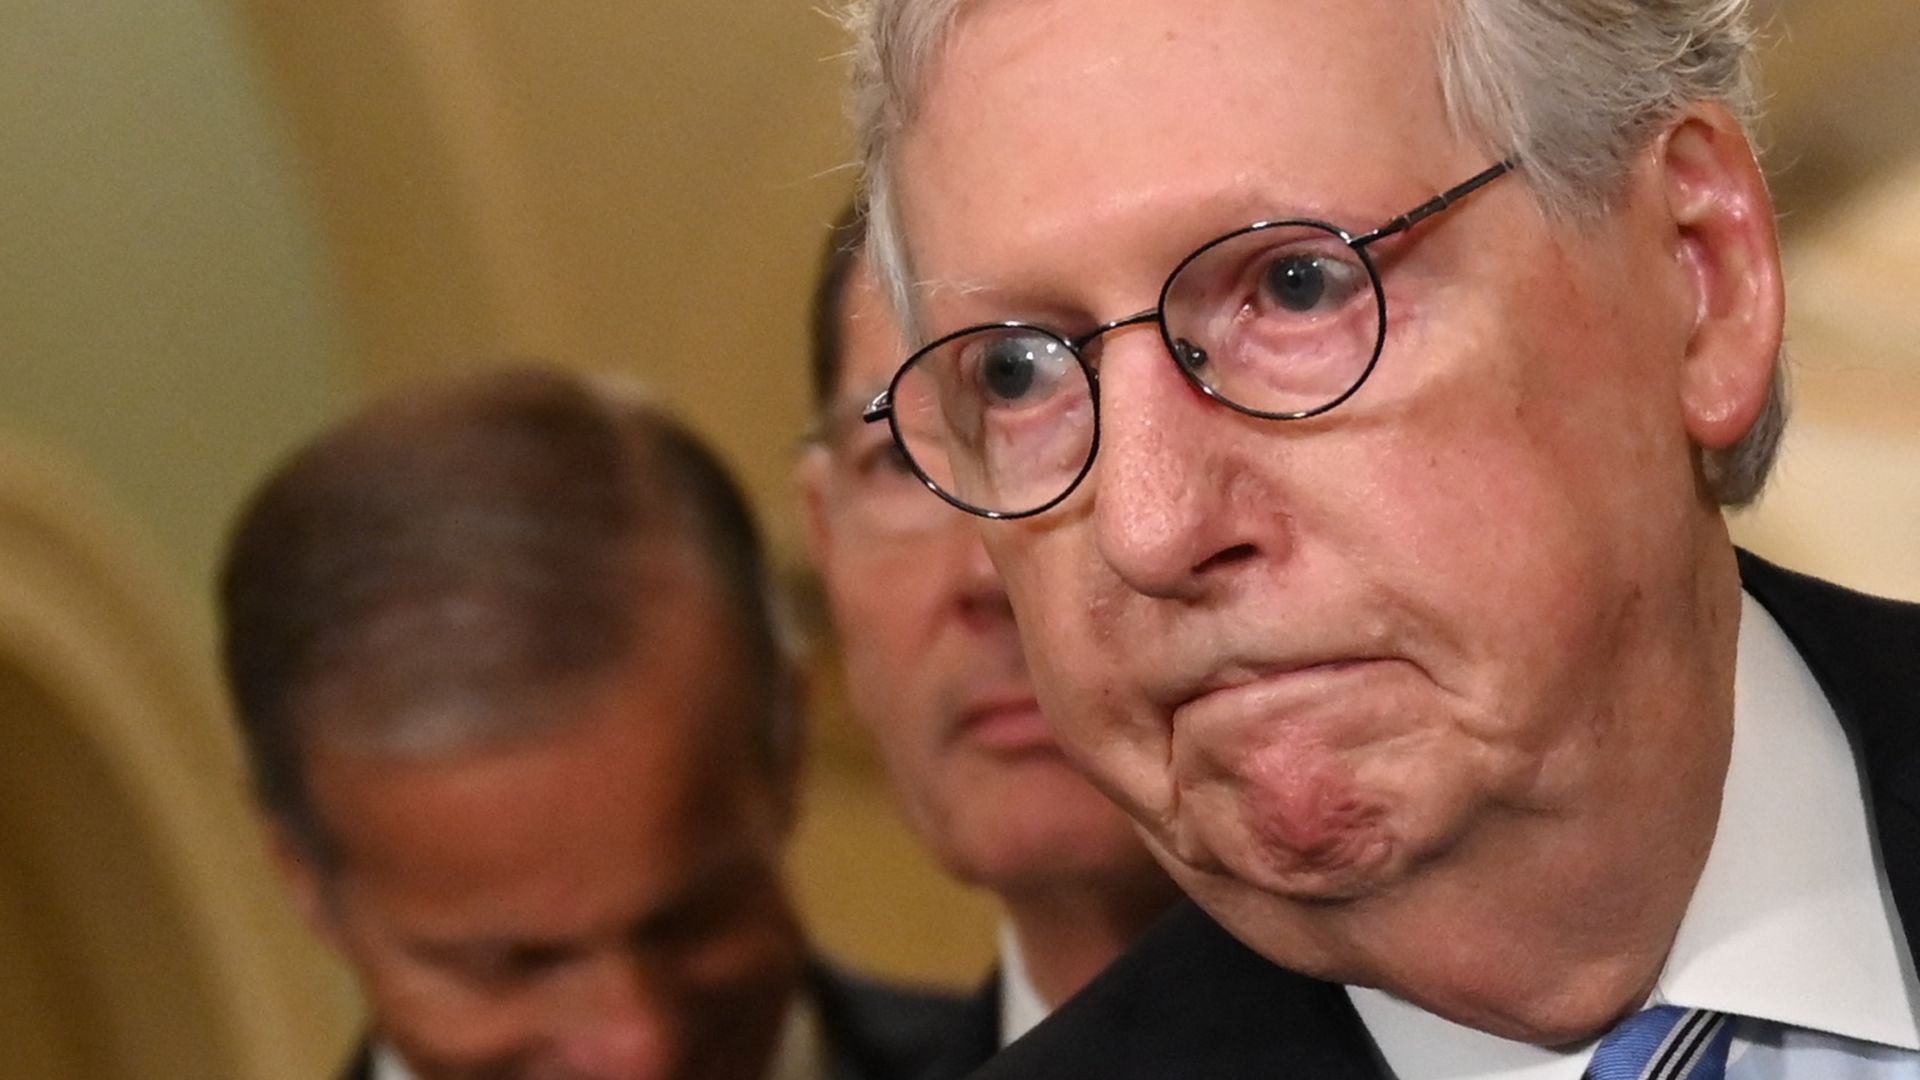 Senate Minority Leader Mitch McConnell is seen speaking with reporters.